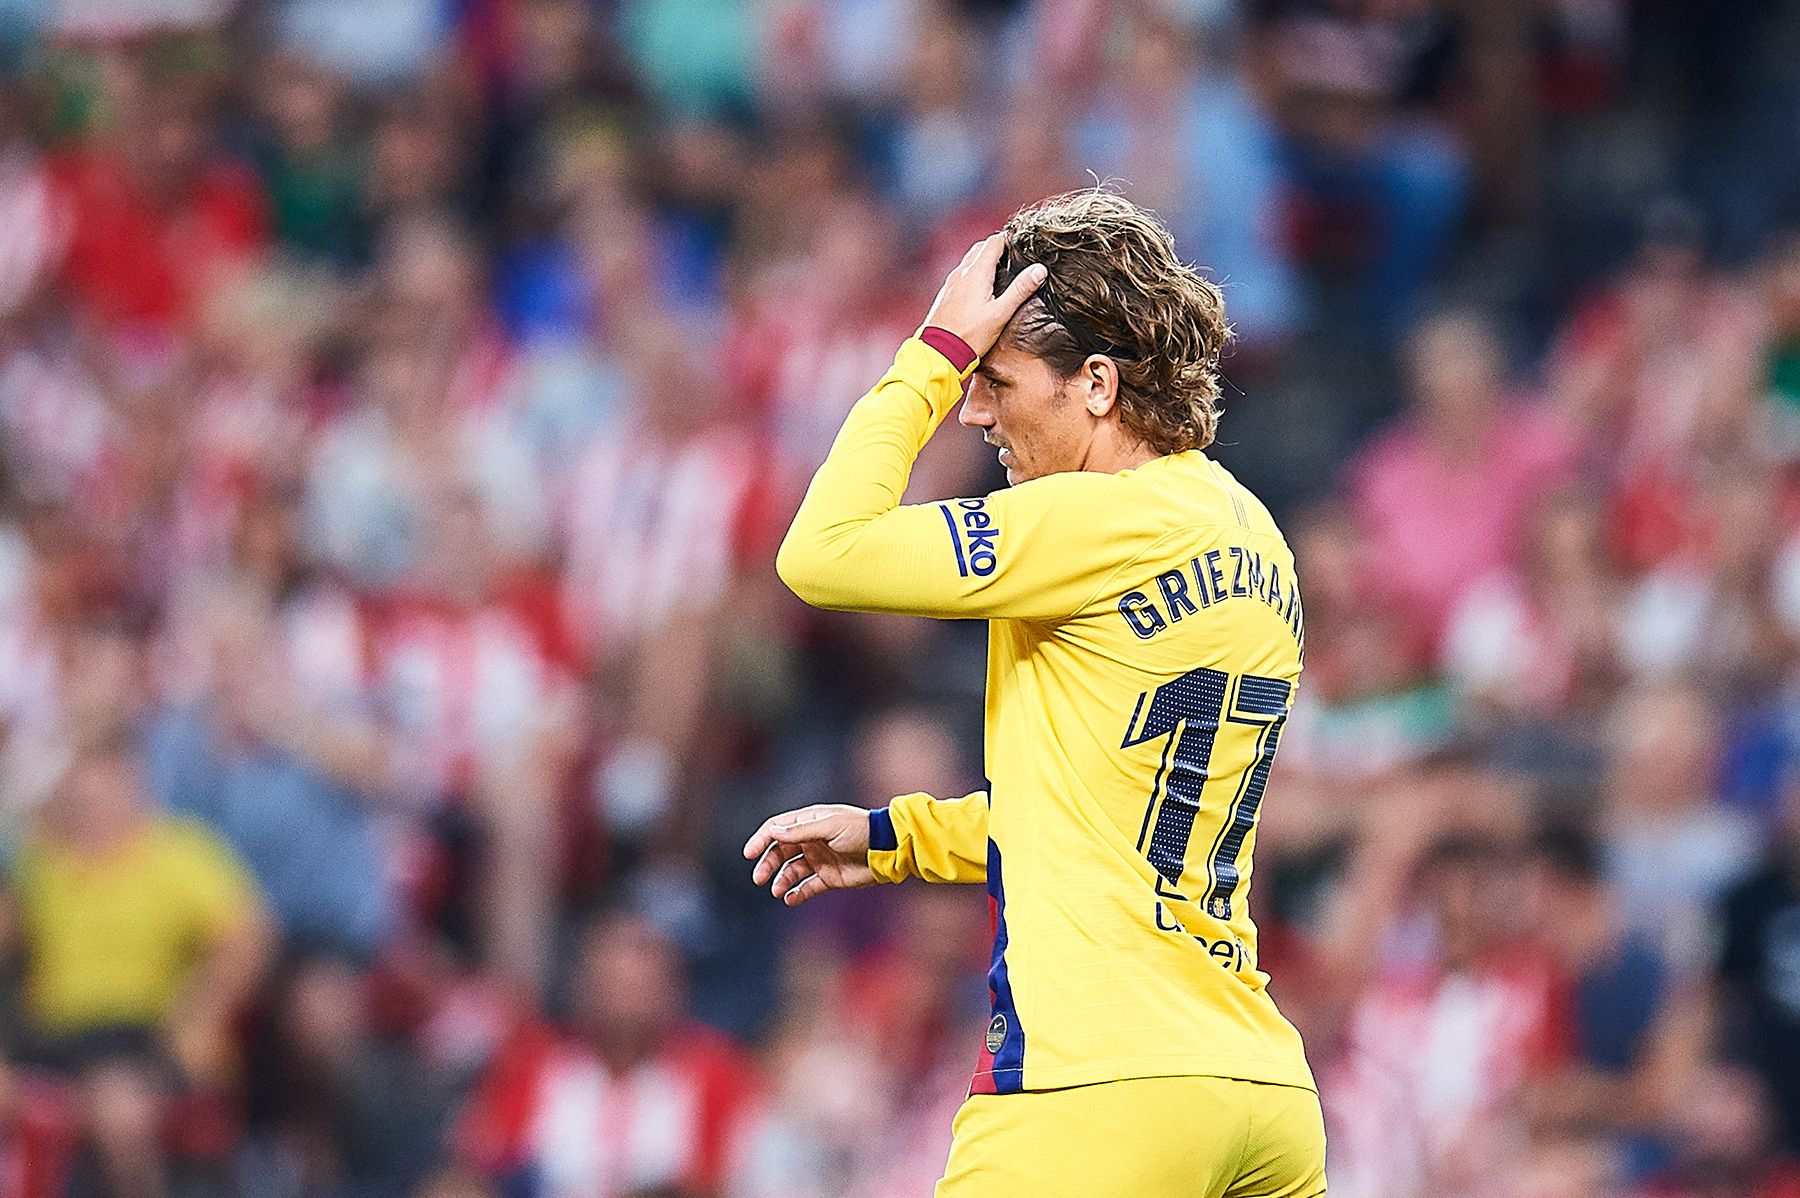 Griezmann During the match against the Athletic